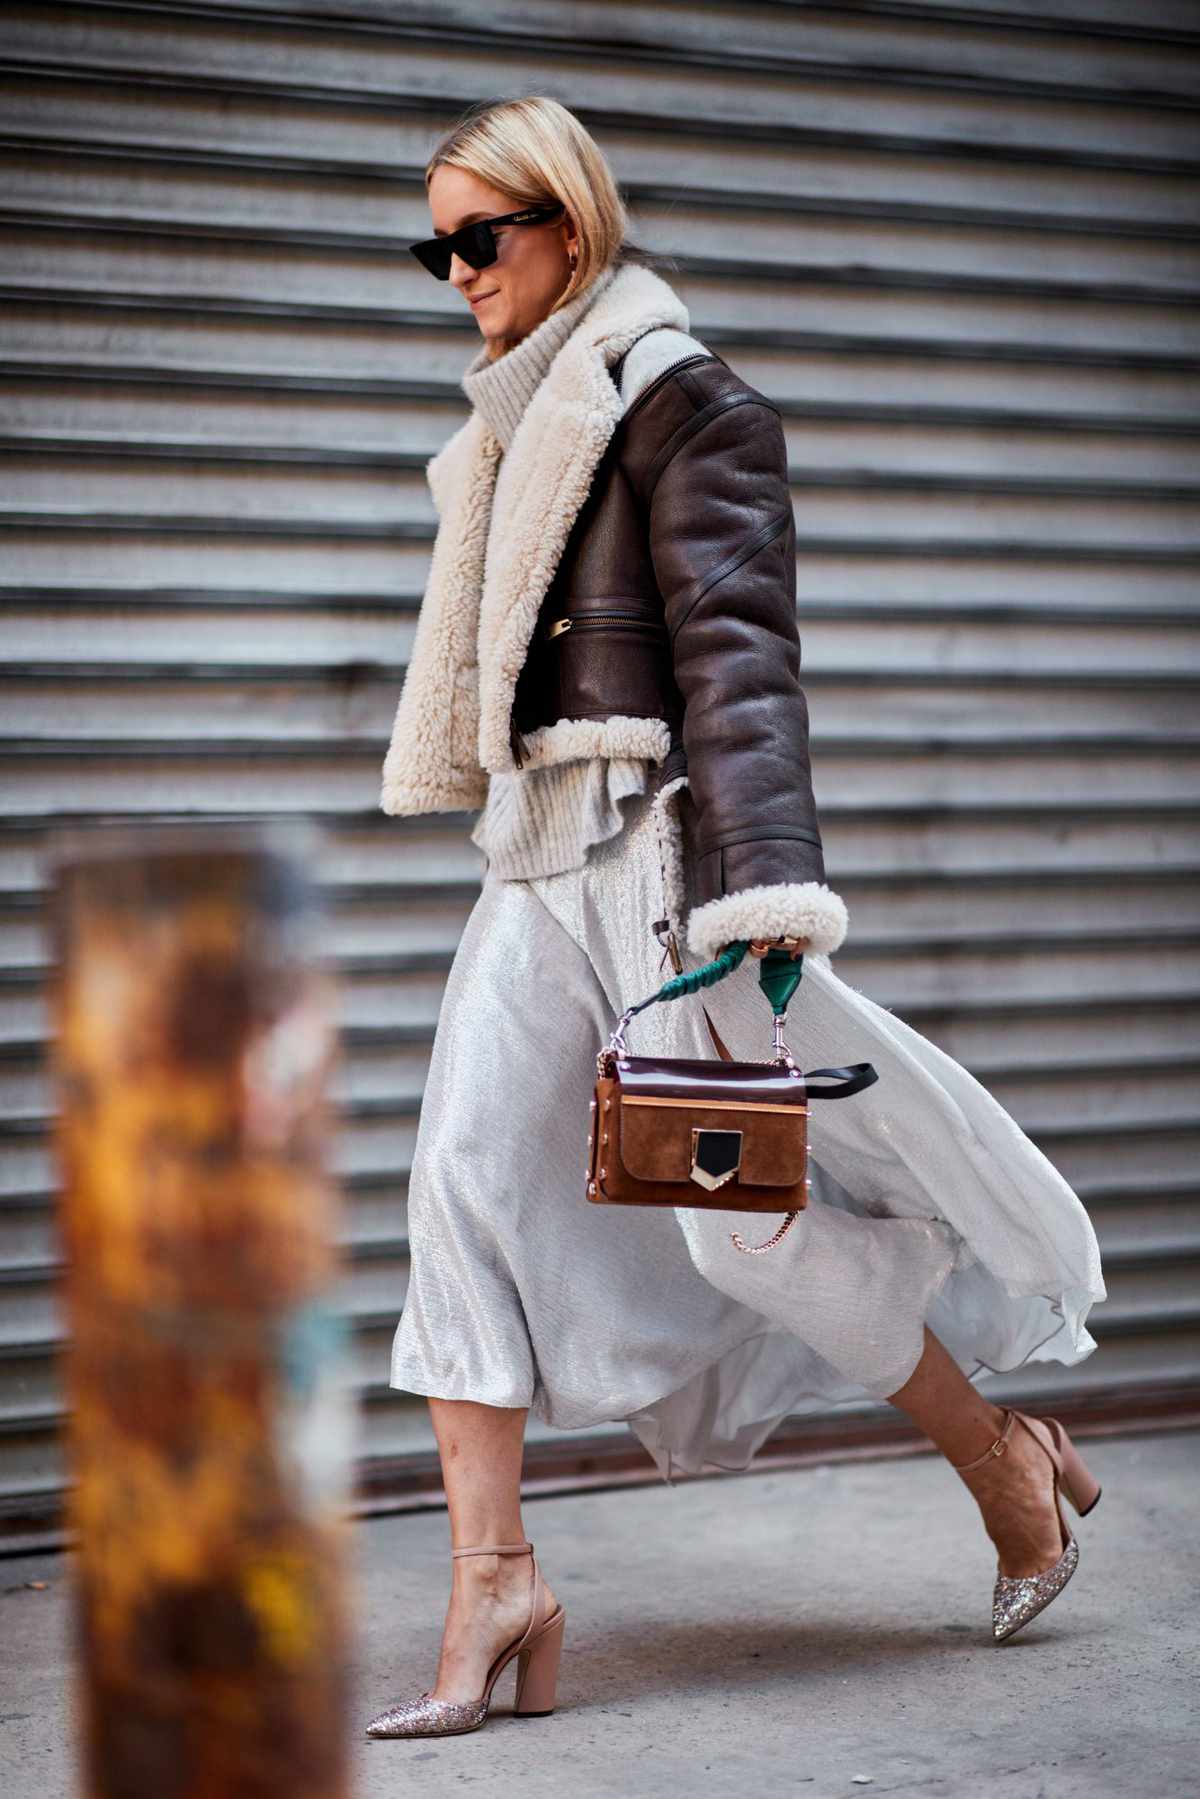 Wrap up in Shearling